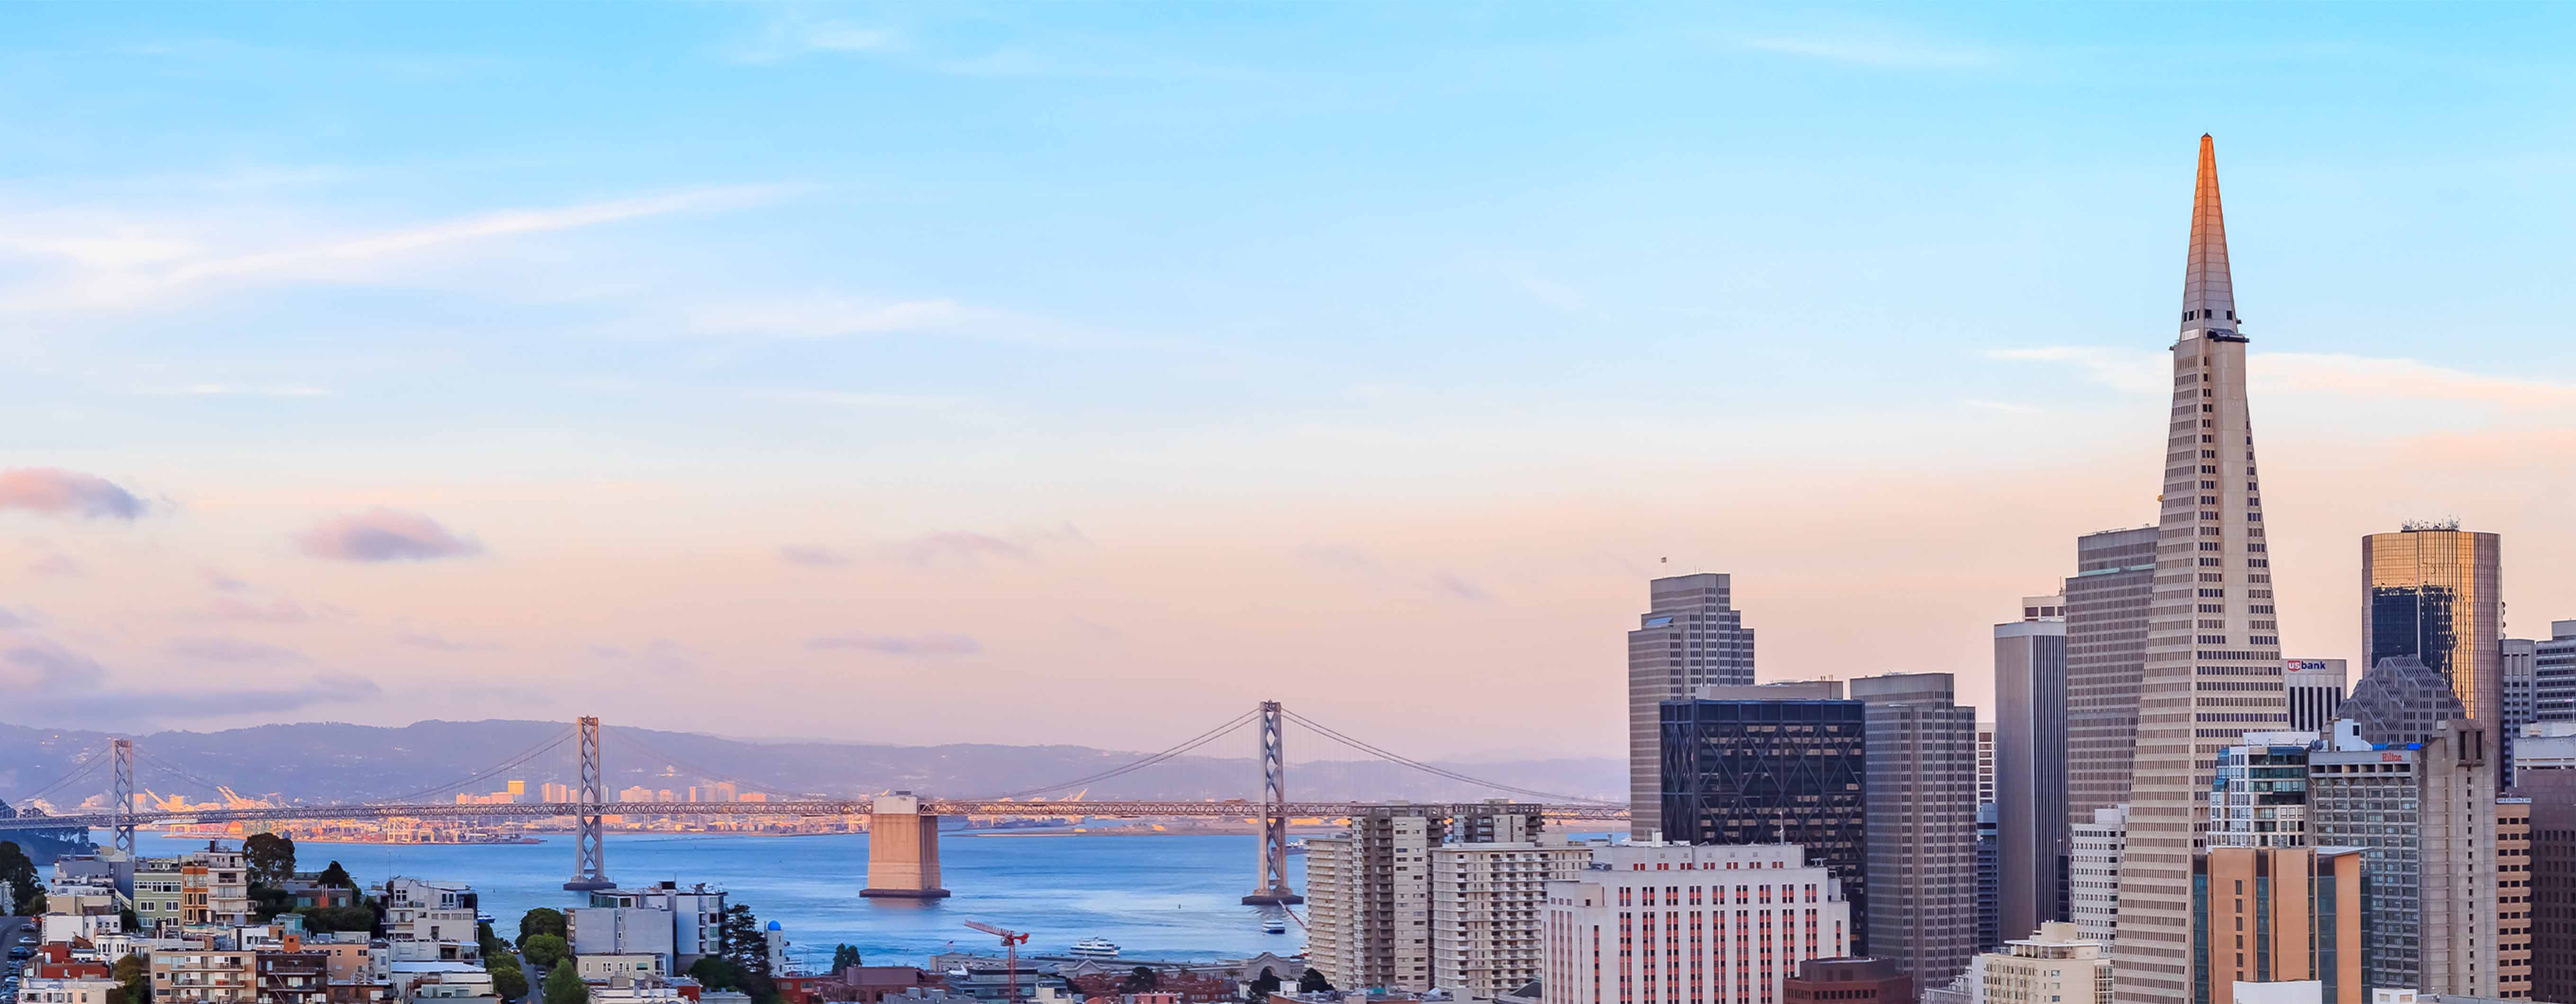 Image of the San Francisco city skyline with a body of water and golden gate bridge in the background